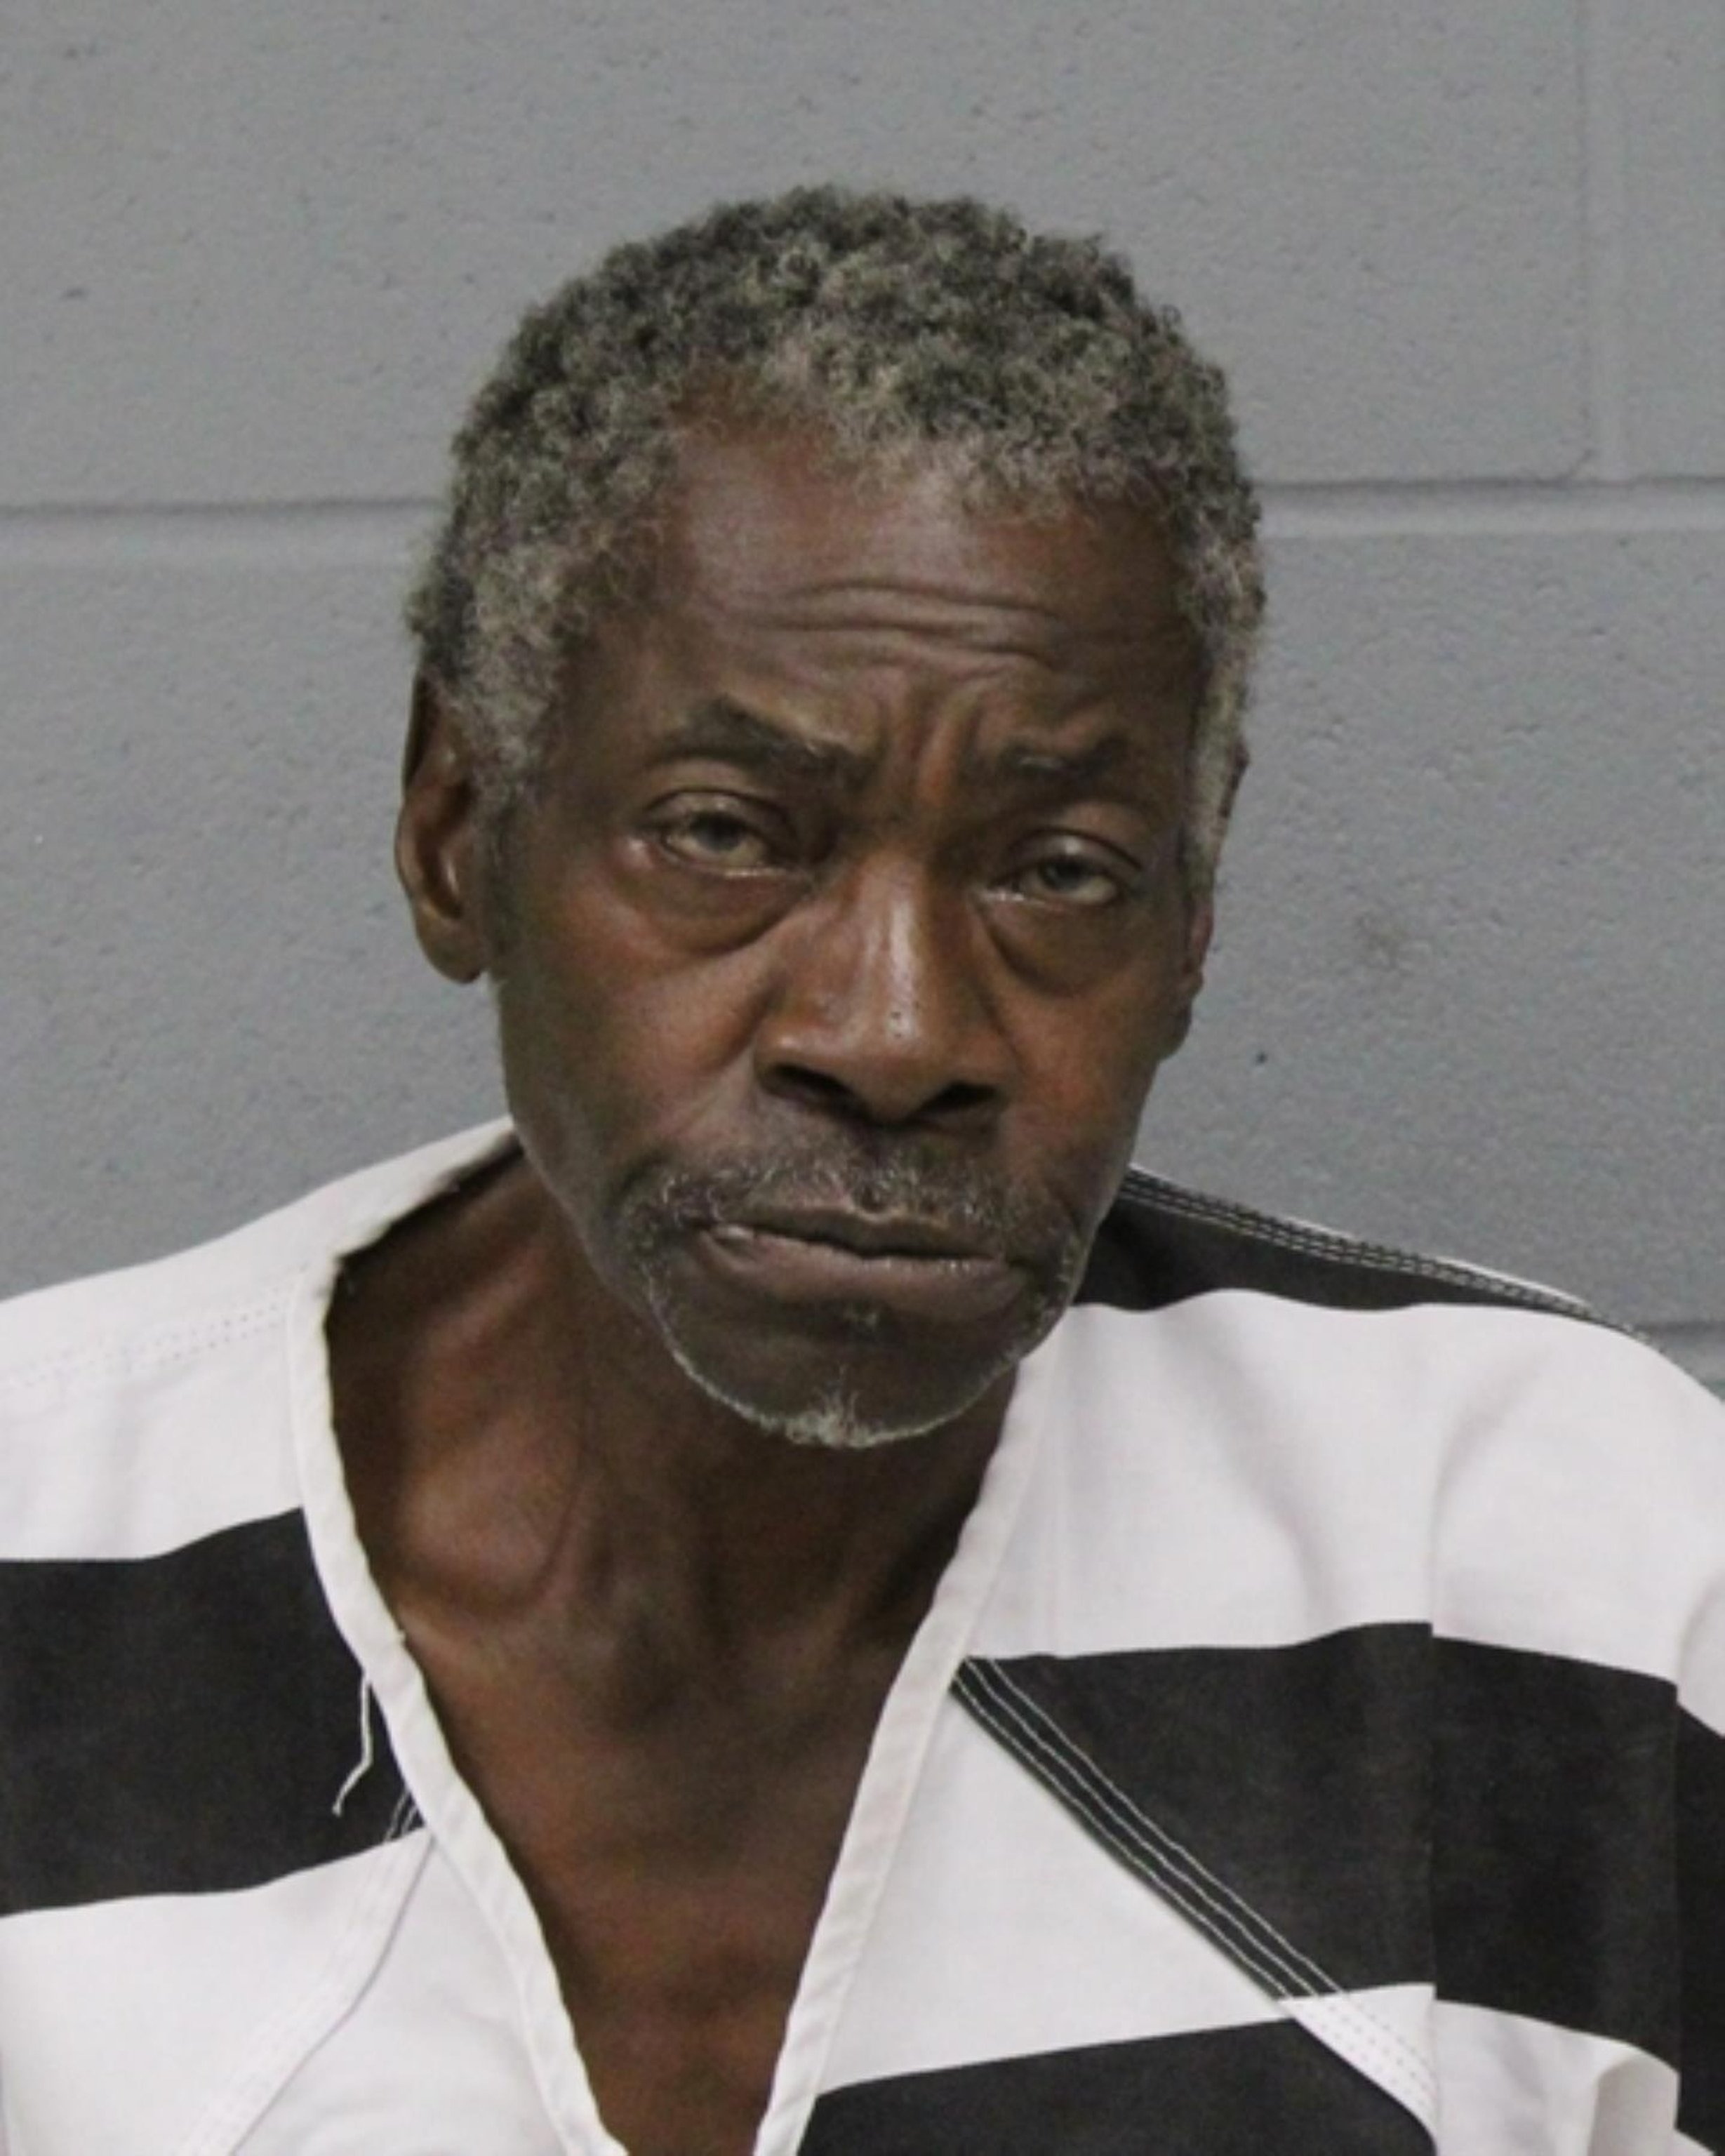 PHOTO: A man is dead after police say he was attacked by a 62-year-old man named Ronnie Green, pictured, which left him with injuries that ultimately led to his death, according to a statement released by the Austin Police Department on Nov. 28, 2023.